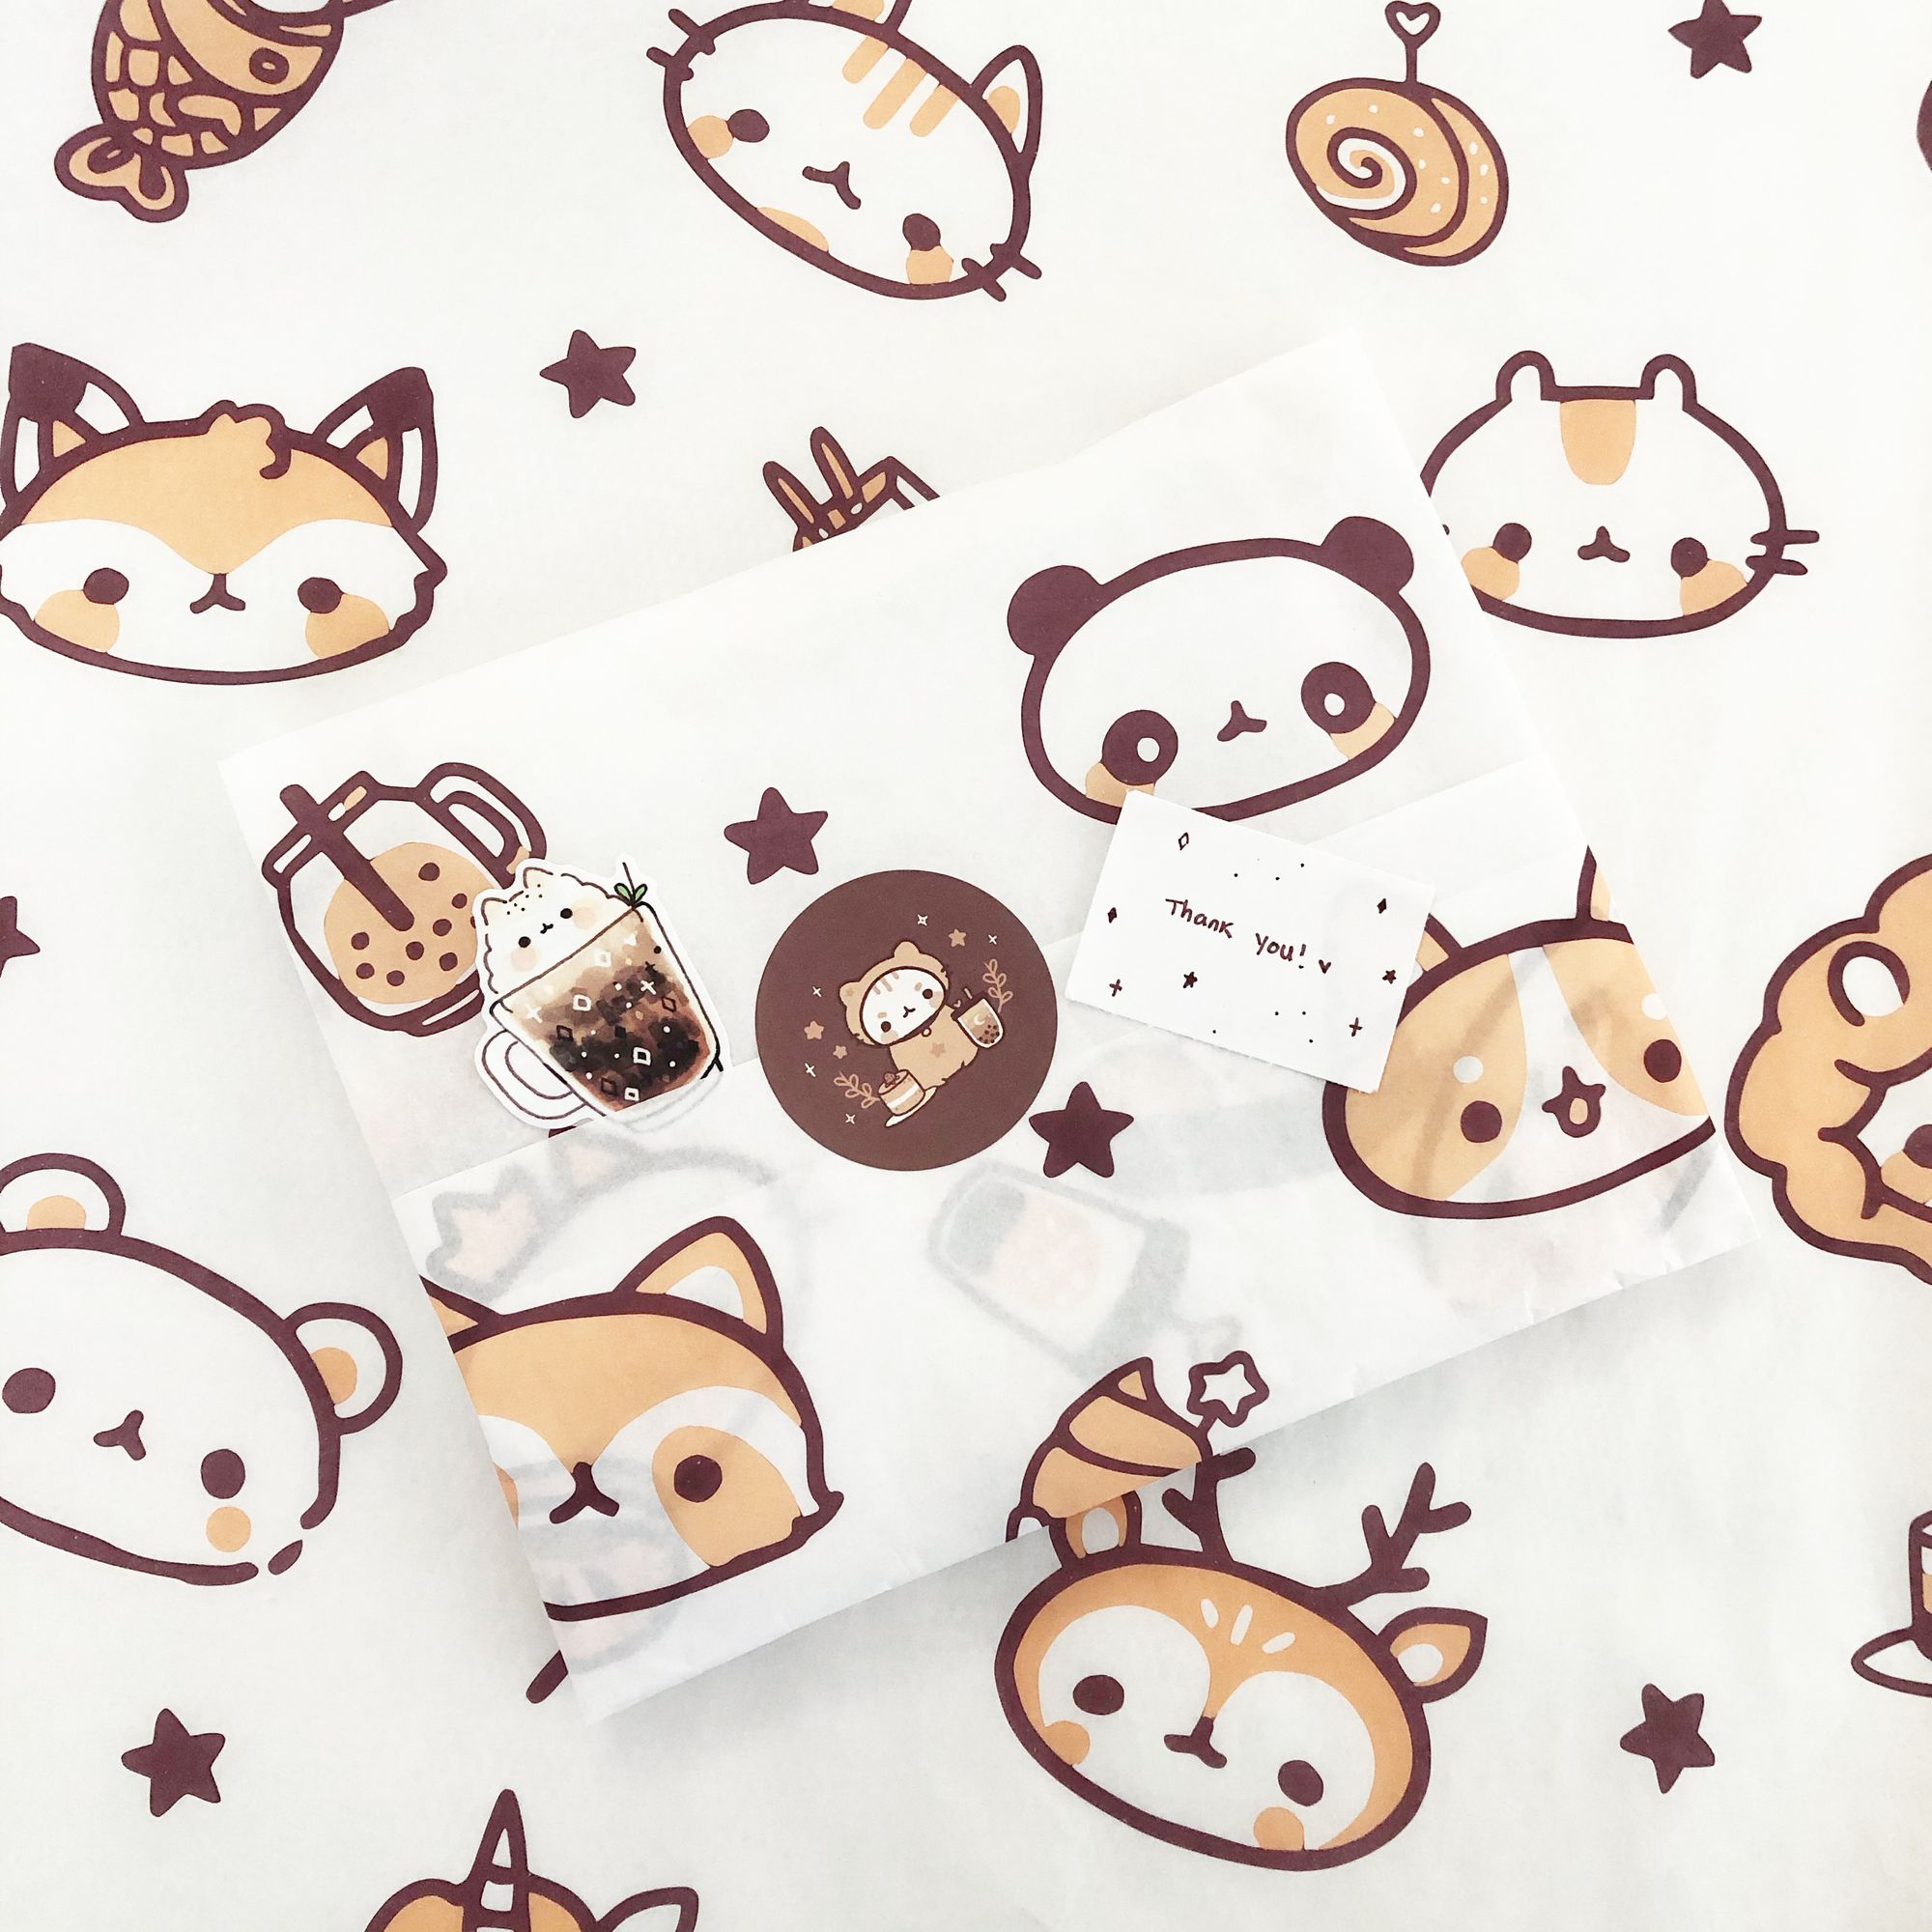 Kawaii Designs and On-Brand Packaging with MochaMochiCake